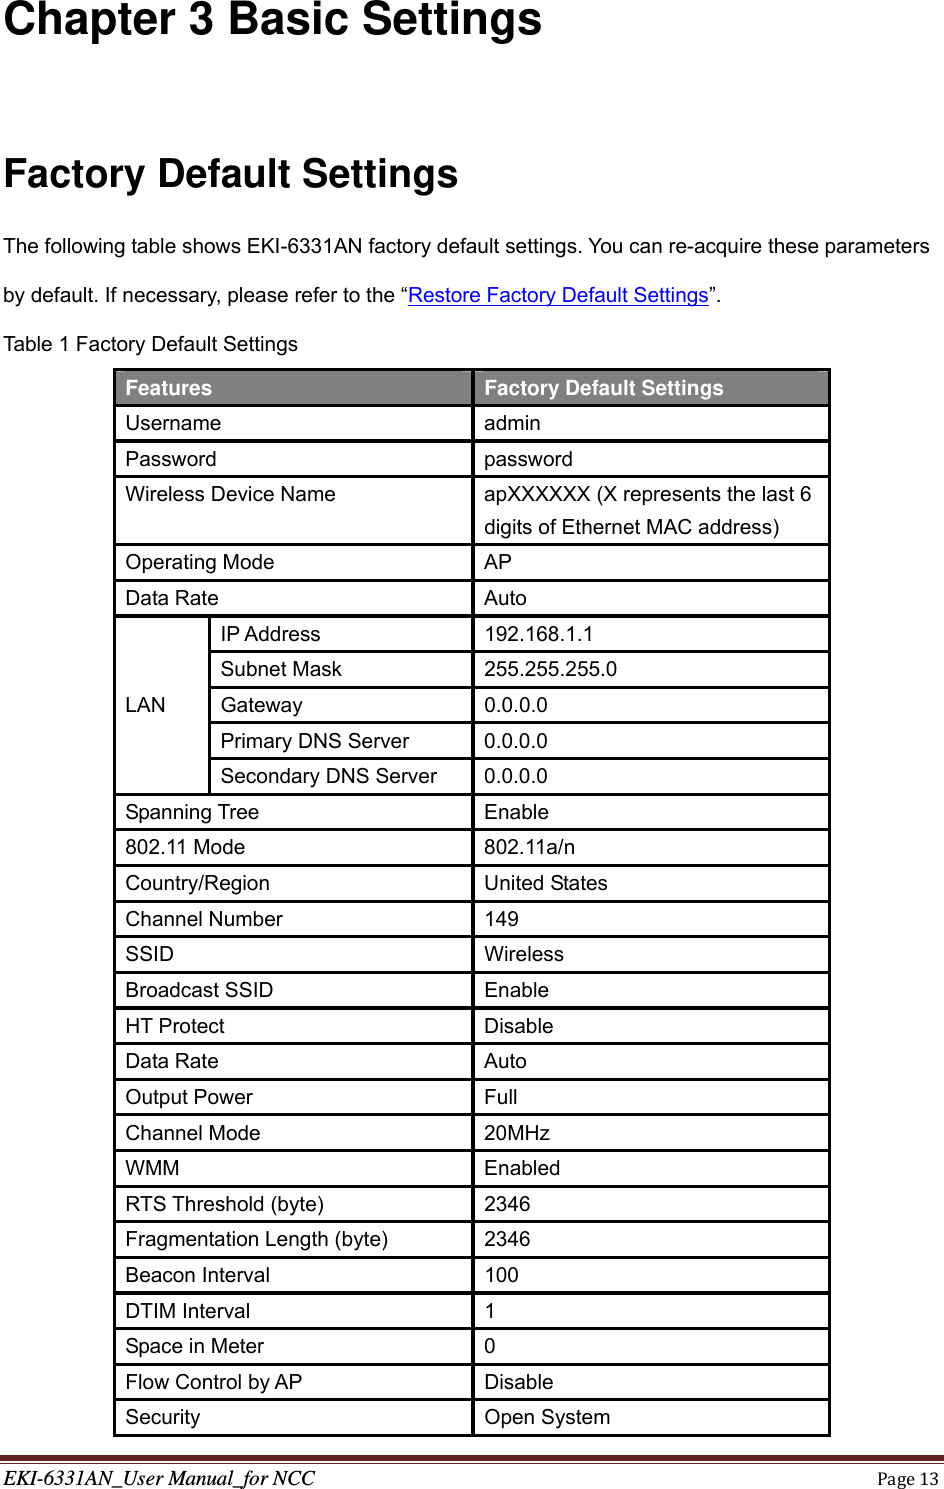 EKI-6331AN_User Manual_for NCCPage13Chapter 3 Basic Settings  Factory Default Settings The following table shows EKI-6331AN factory default settings. You can re-acquire these parameters by default. If necessary, please refer to the “Restore Factory Default Settings”. Table 1 Factory Default Settings Features  Factory Default Settings Username admin Password password Wireless Device Name  apXXXXXX (X represents the last 6 digits of Ethernet MAC address) Operating Mode  AP Data Rate  Auto LAN  IP Address  192.168.1.1 Subnet Mask  255.255.255.0 Gateway 0.0.0.0 Primary DNS Server  0.0.0.0 Secondary DNS Server  0.0.0.0 Spanning Tree  Enable 802.11 Mode  802.11a/n Country/Region United States Channel Number  149 SSID Wireless Broadcast SSID  Enable HT Protect  Disable Data Rate  Auto Output Power  Full Channel Mode  20MHz WMM Enabled RTS Threshold (byte)  2346 Fragmentation Length (byte)  2346 Beacon Interval  100 DTIM Interval  1 Space in Meter  0 Flow Control by AP  Disable Security Open System 